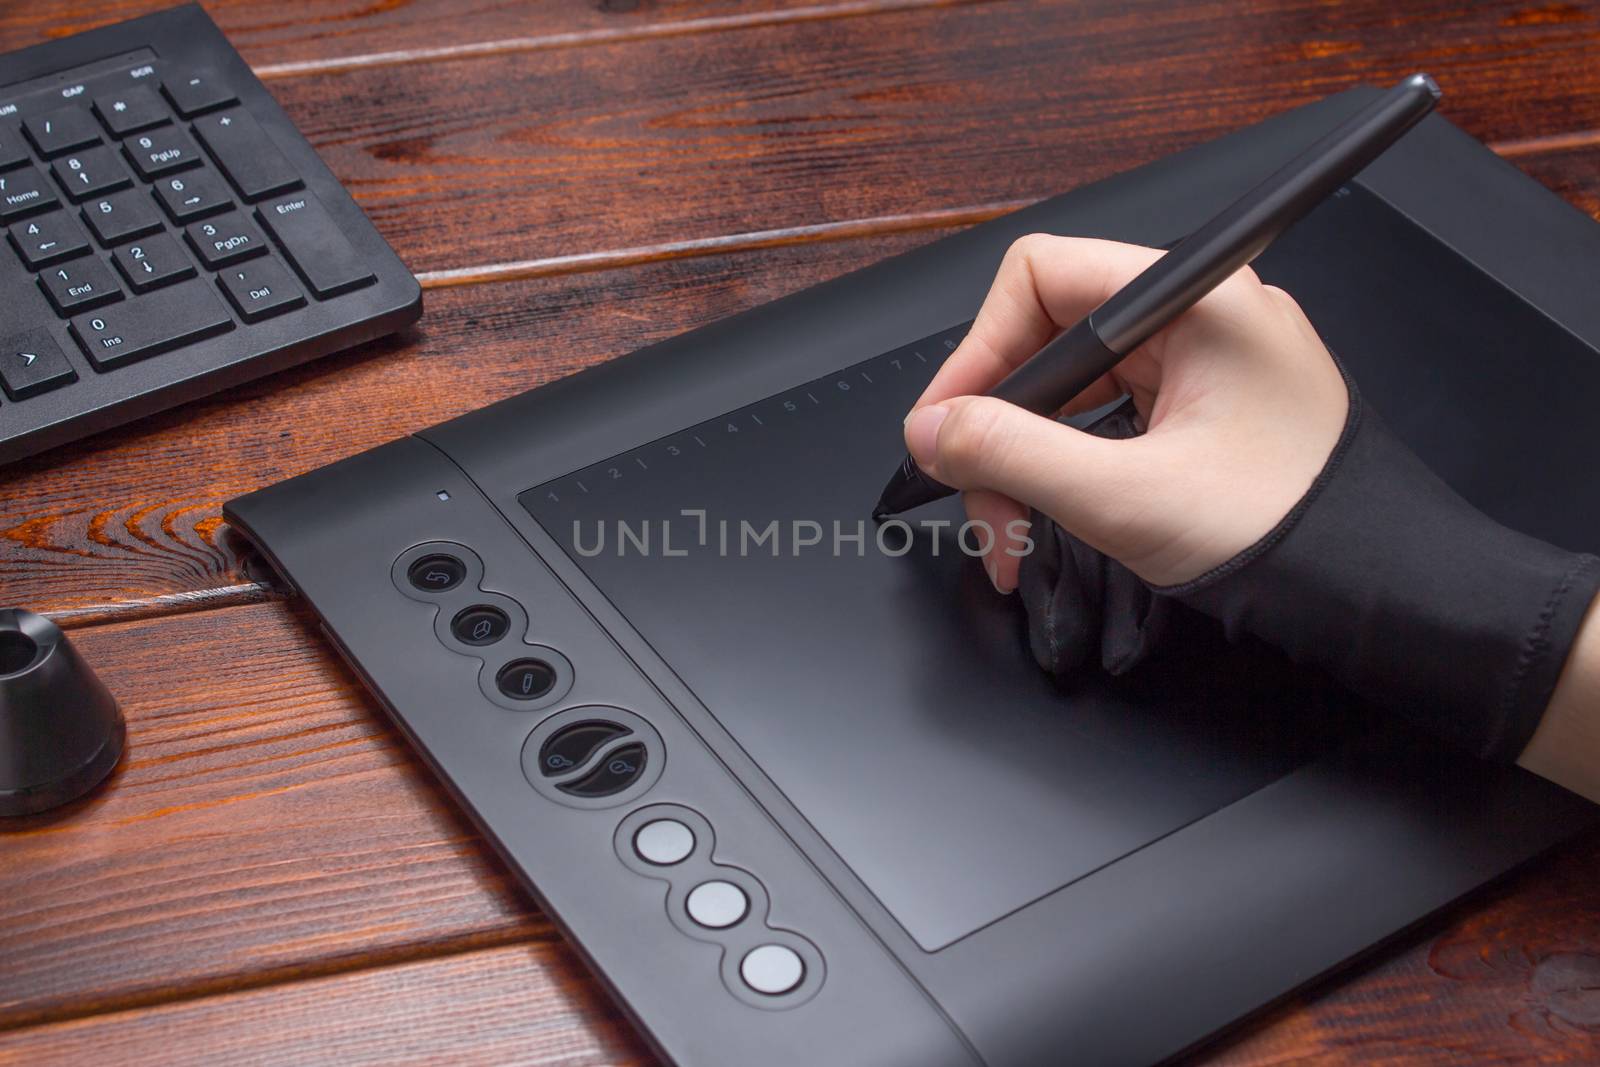 The hand draws on a graphics tablet. Freelance, designer, Illustrator. Technology, remote work, outsourcing. Glove and pen for a graphic tablet. Graphic designer working on digital tablet. Project, co